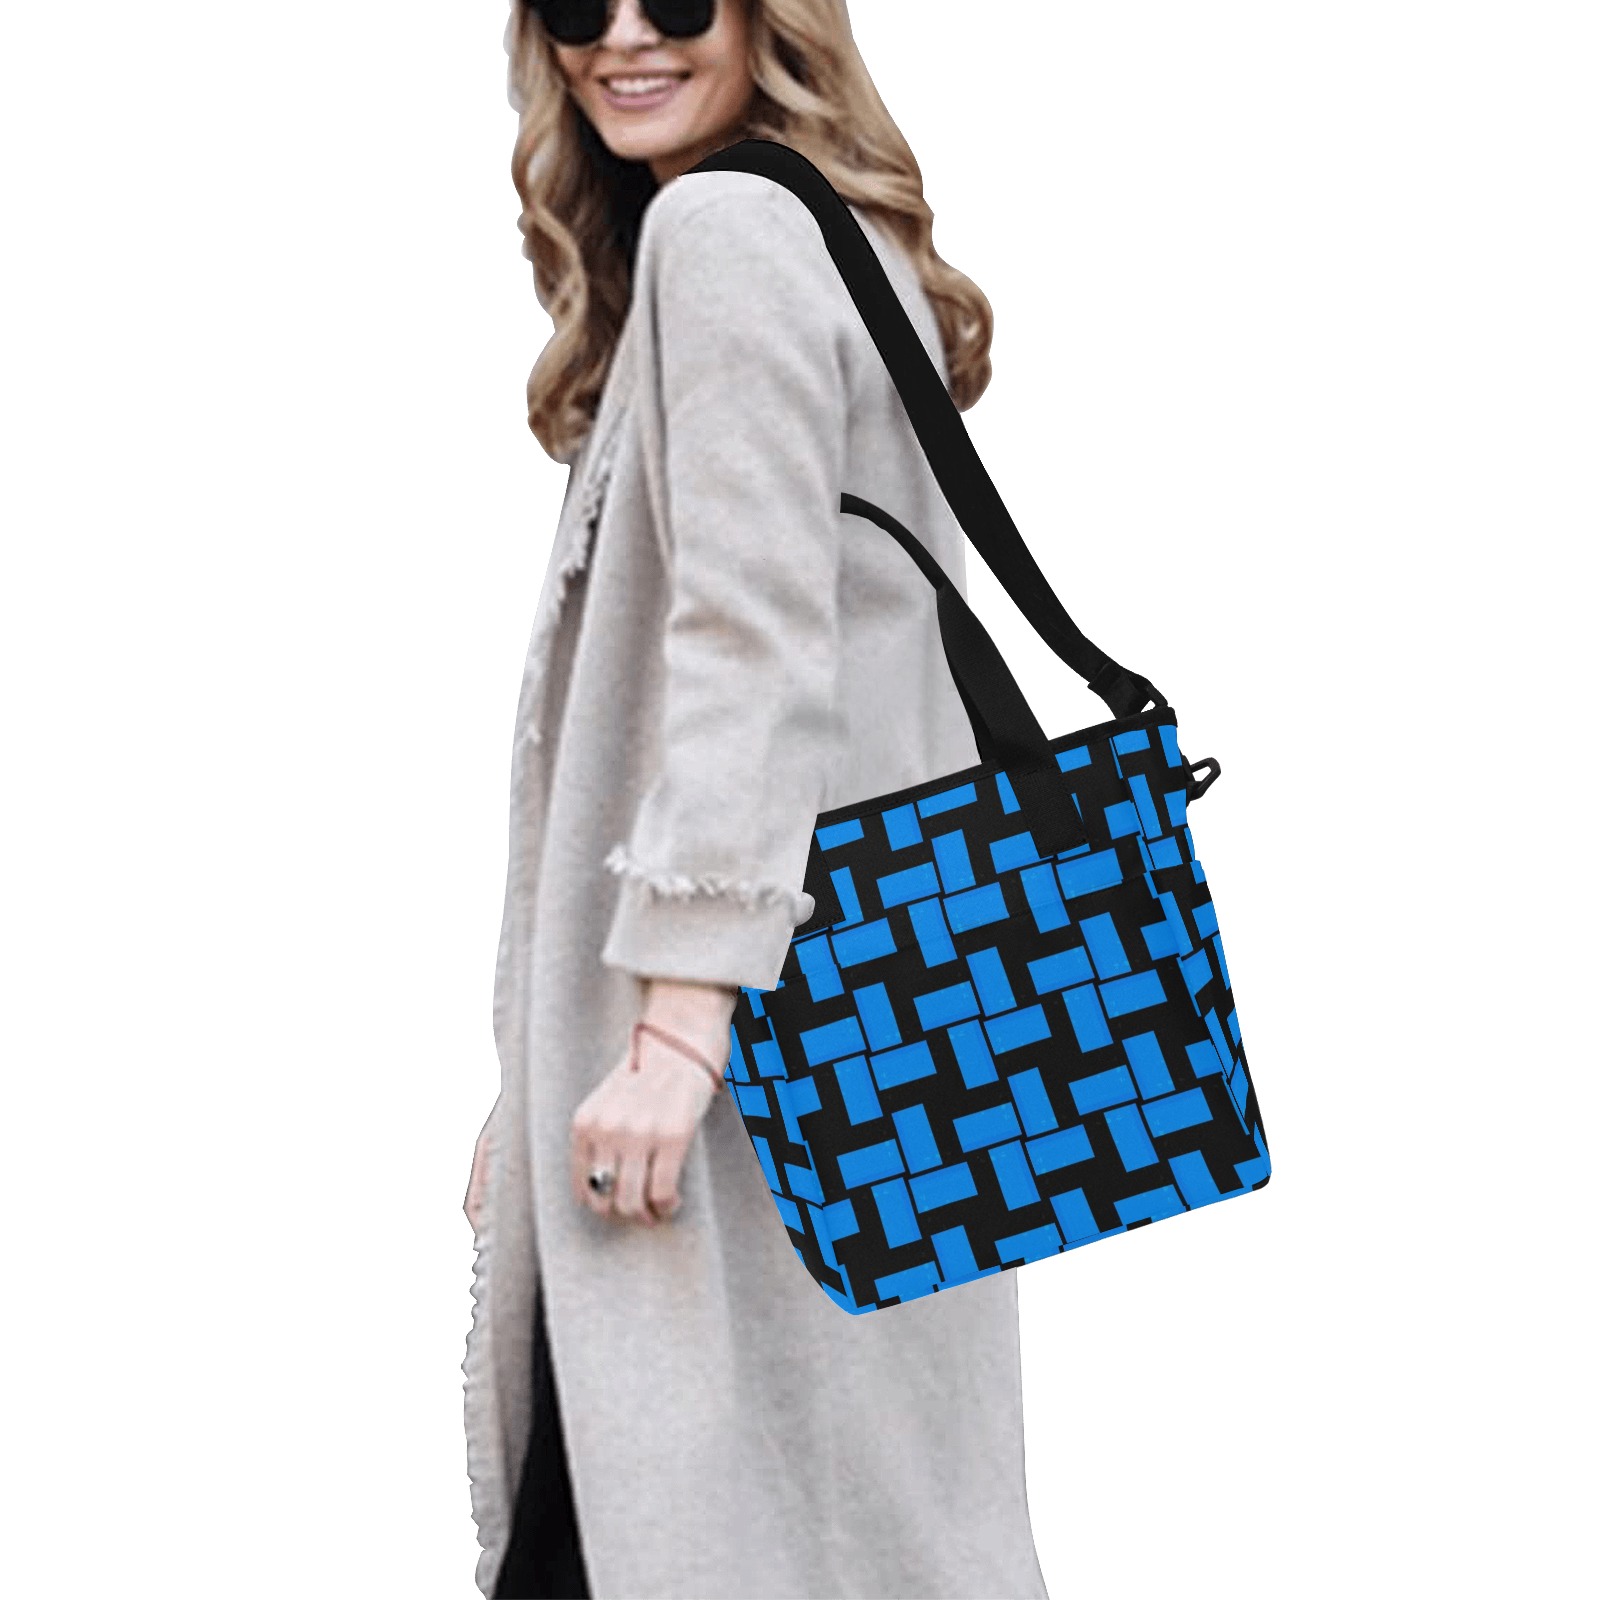 Black and Blue Tote Bag Abstract - Repper.app Tote Bag with Shoulder Strap (Model 1724)